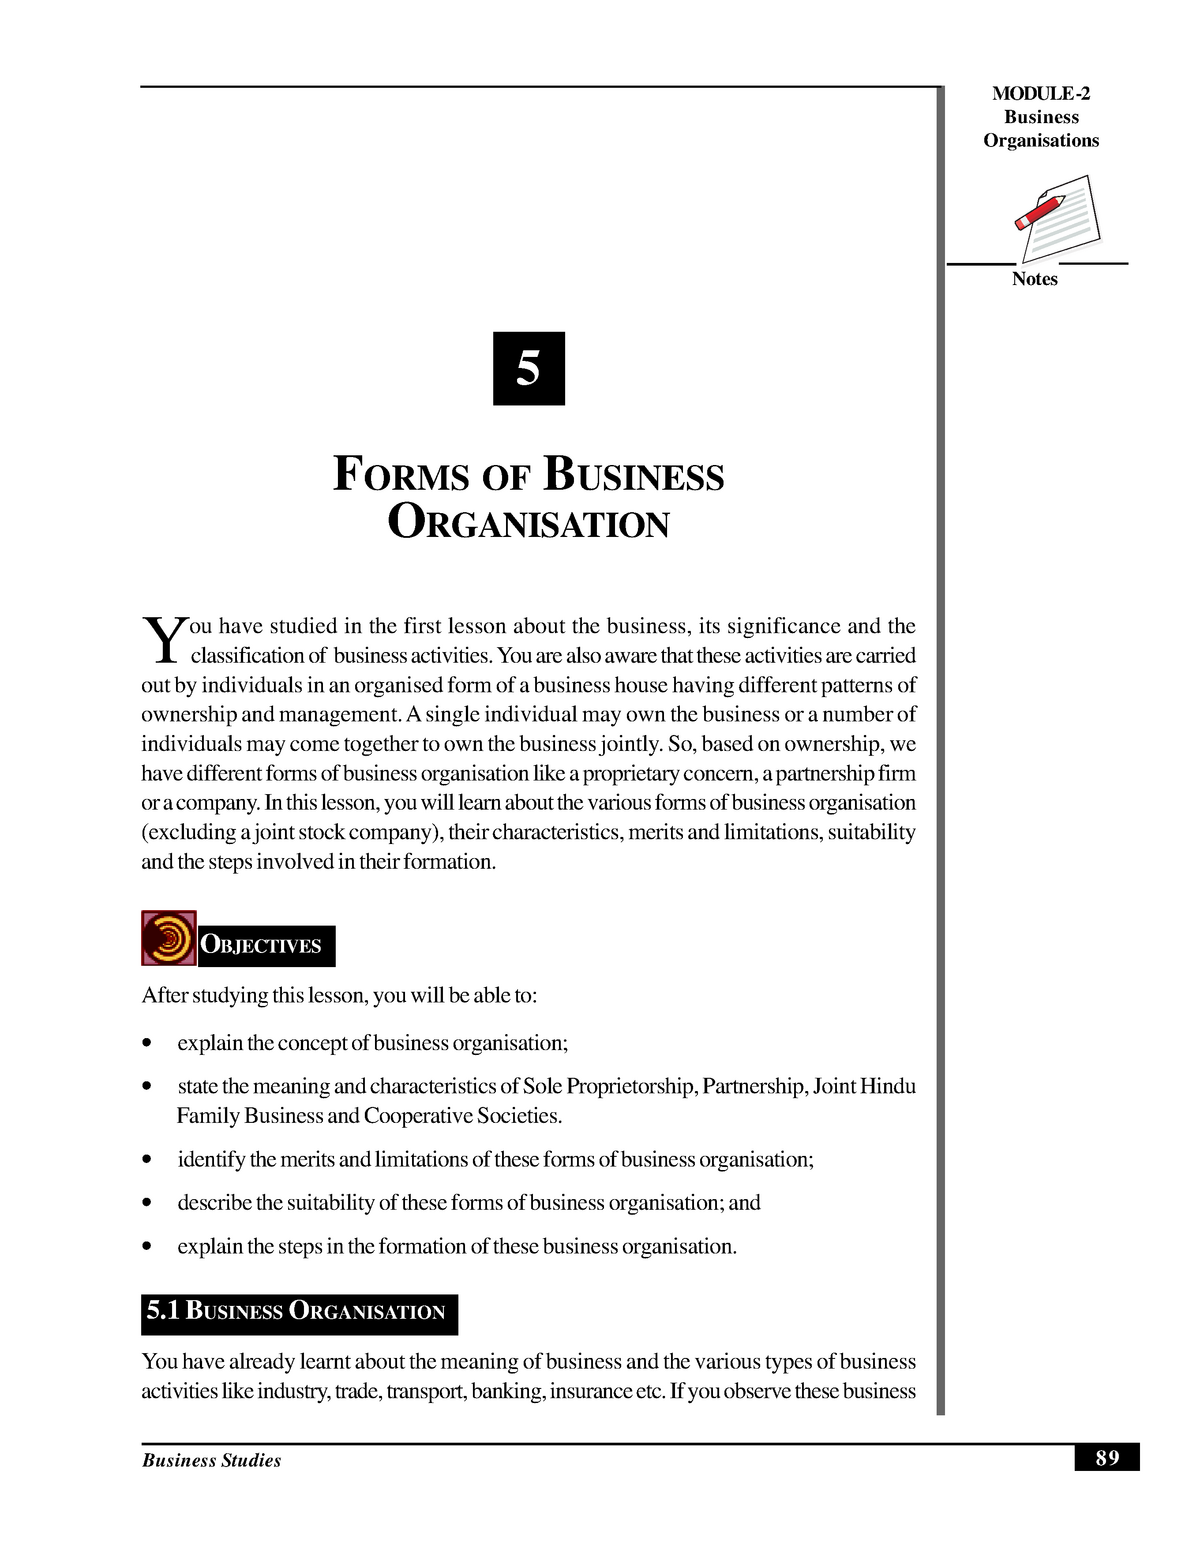 forms of business organisation case study questions